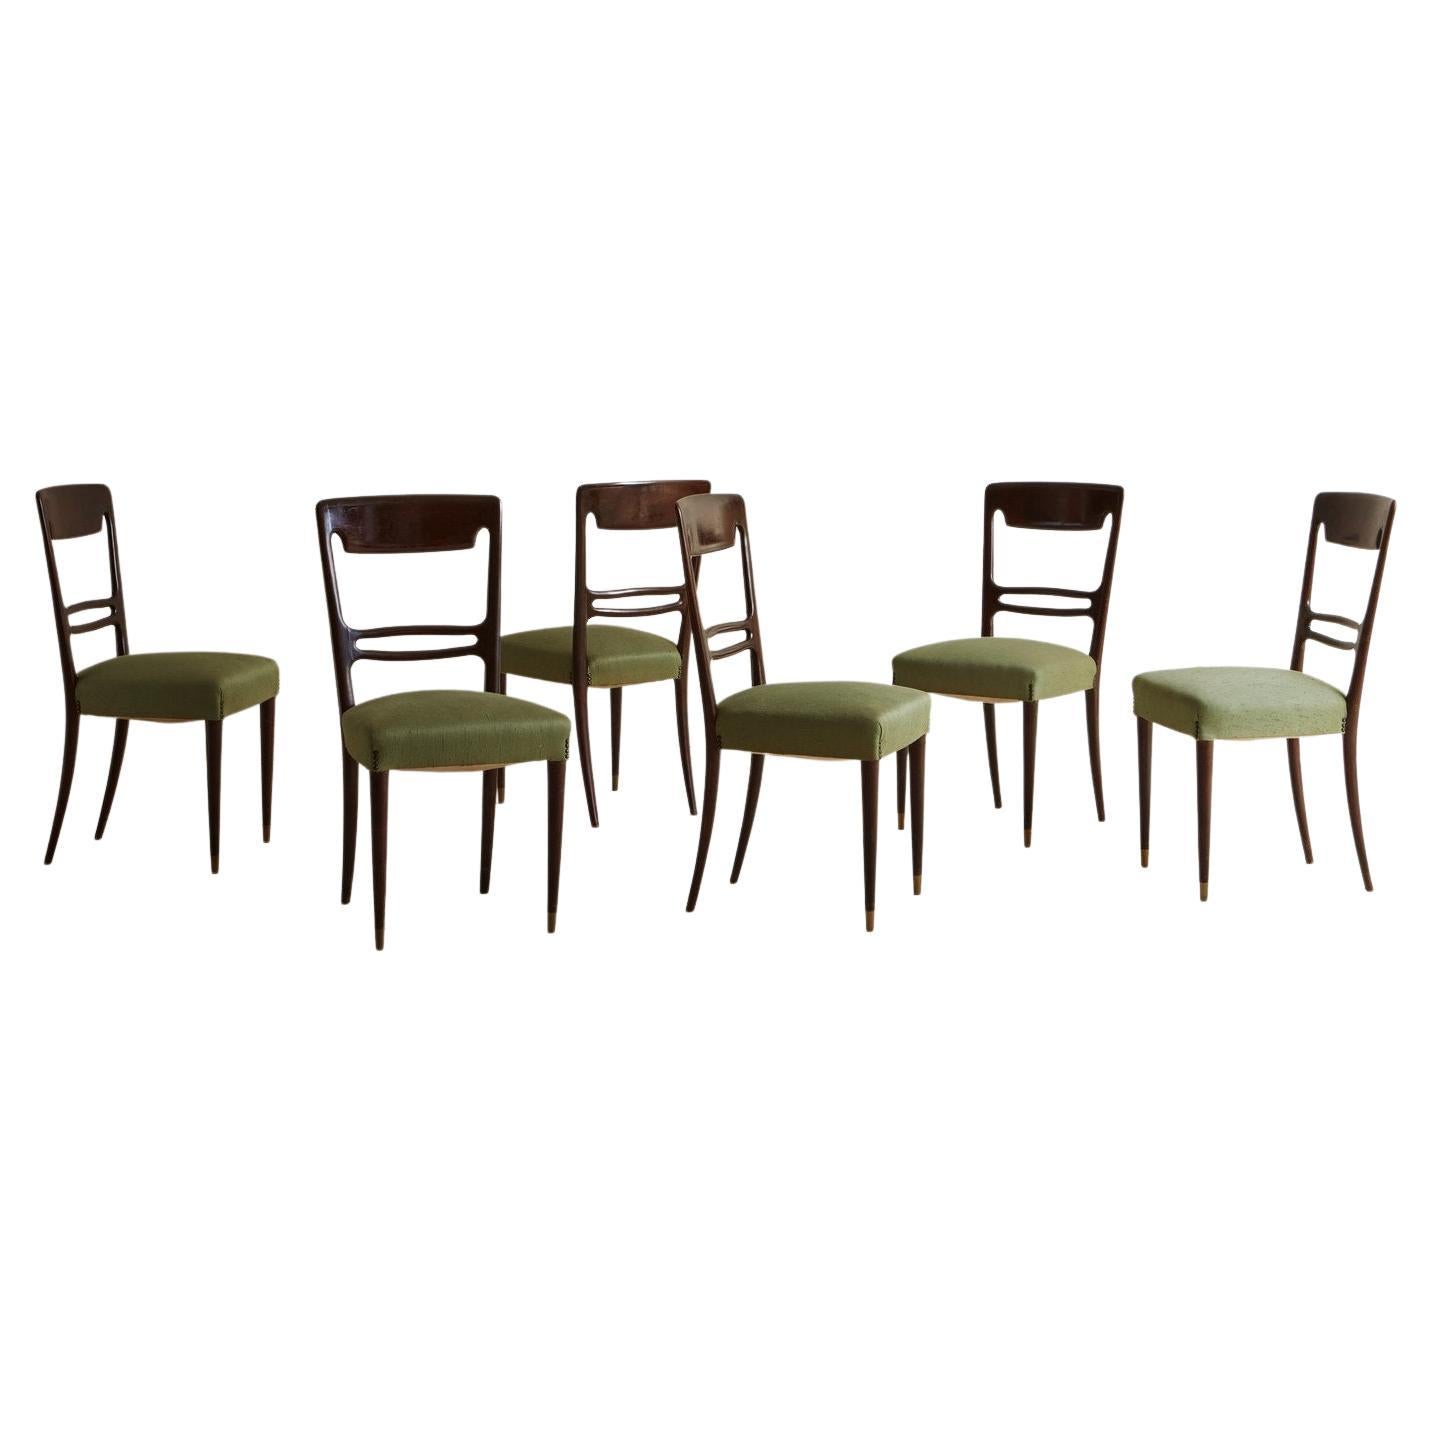 Set of 6 Mahogany Dining Chairs in Green Fabric, France 20th Century